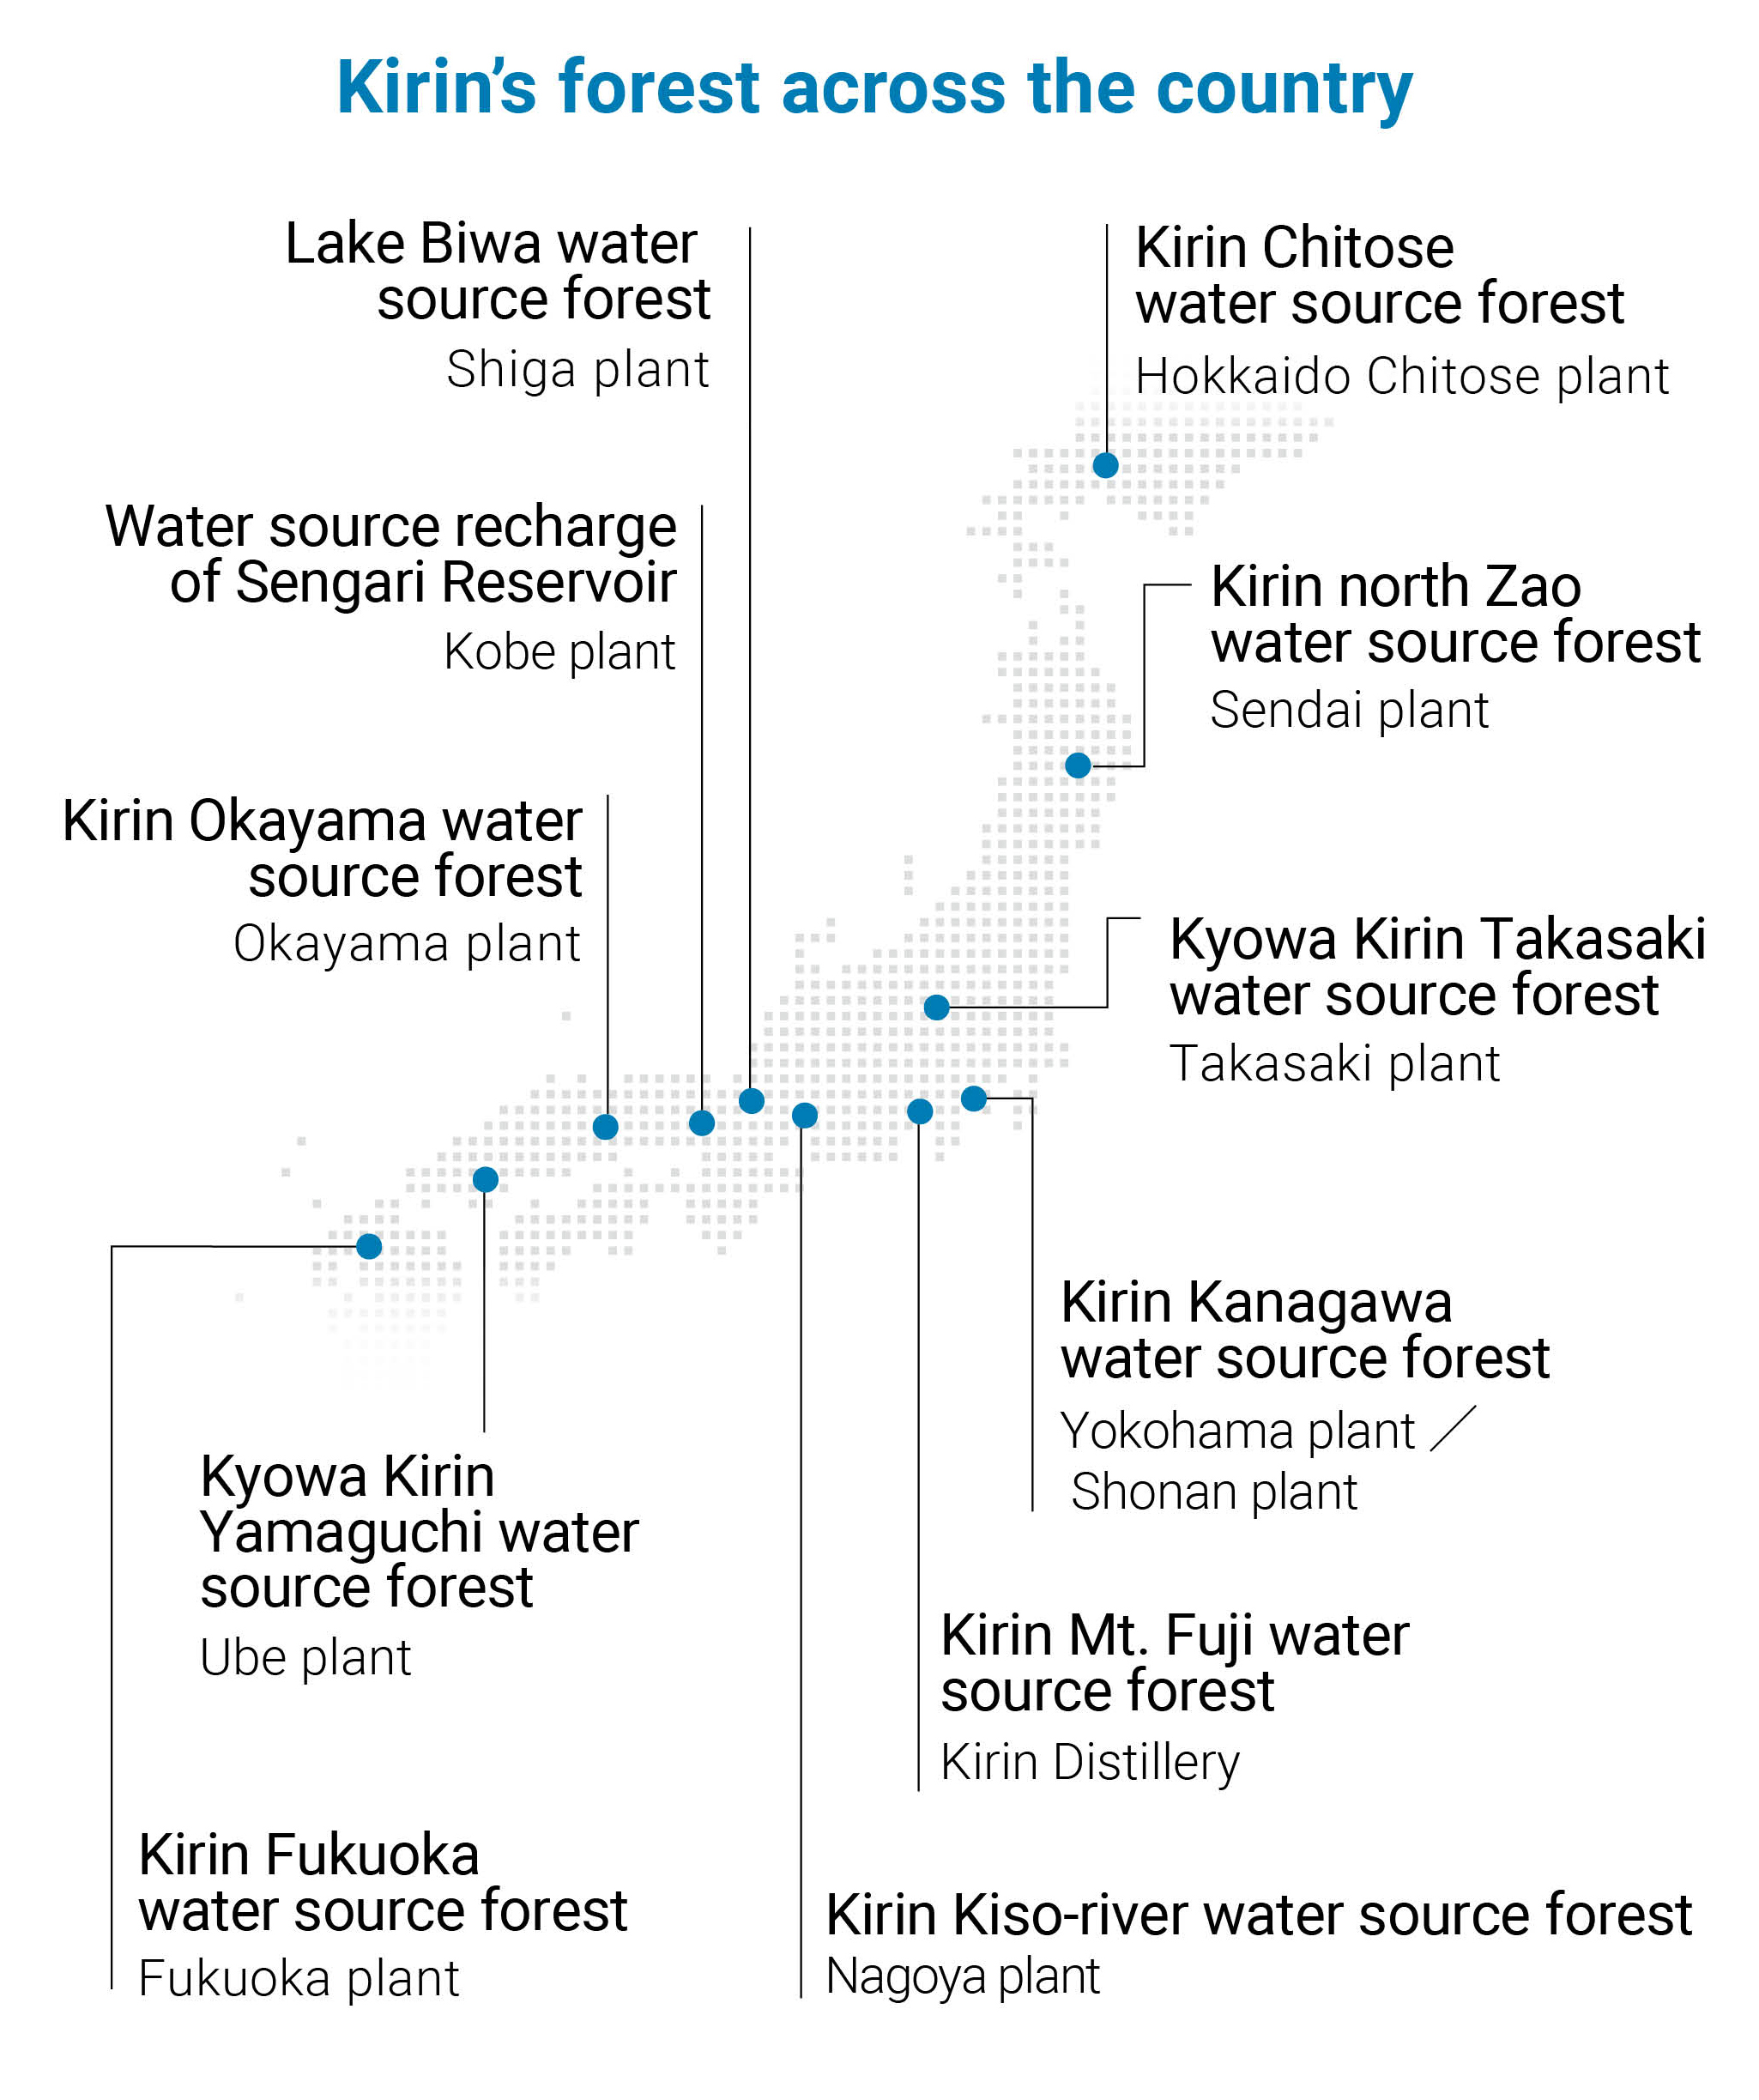 Figure: Kirini's forest across the country